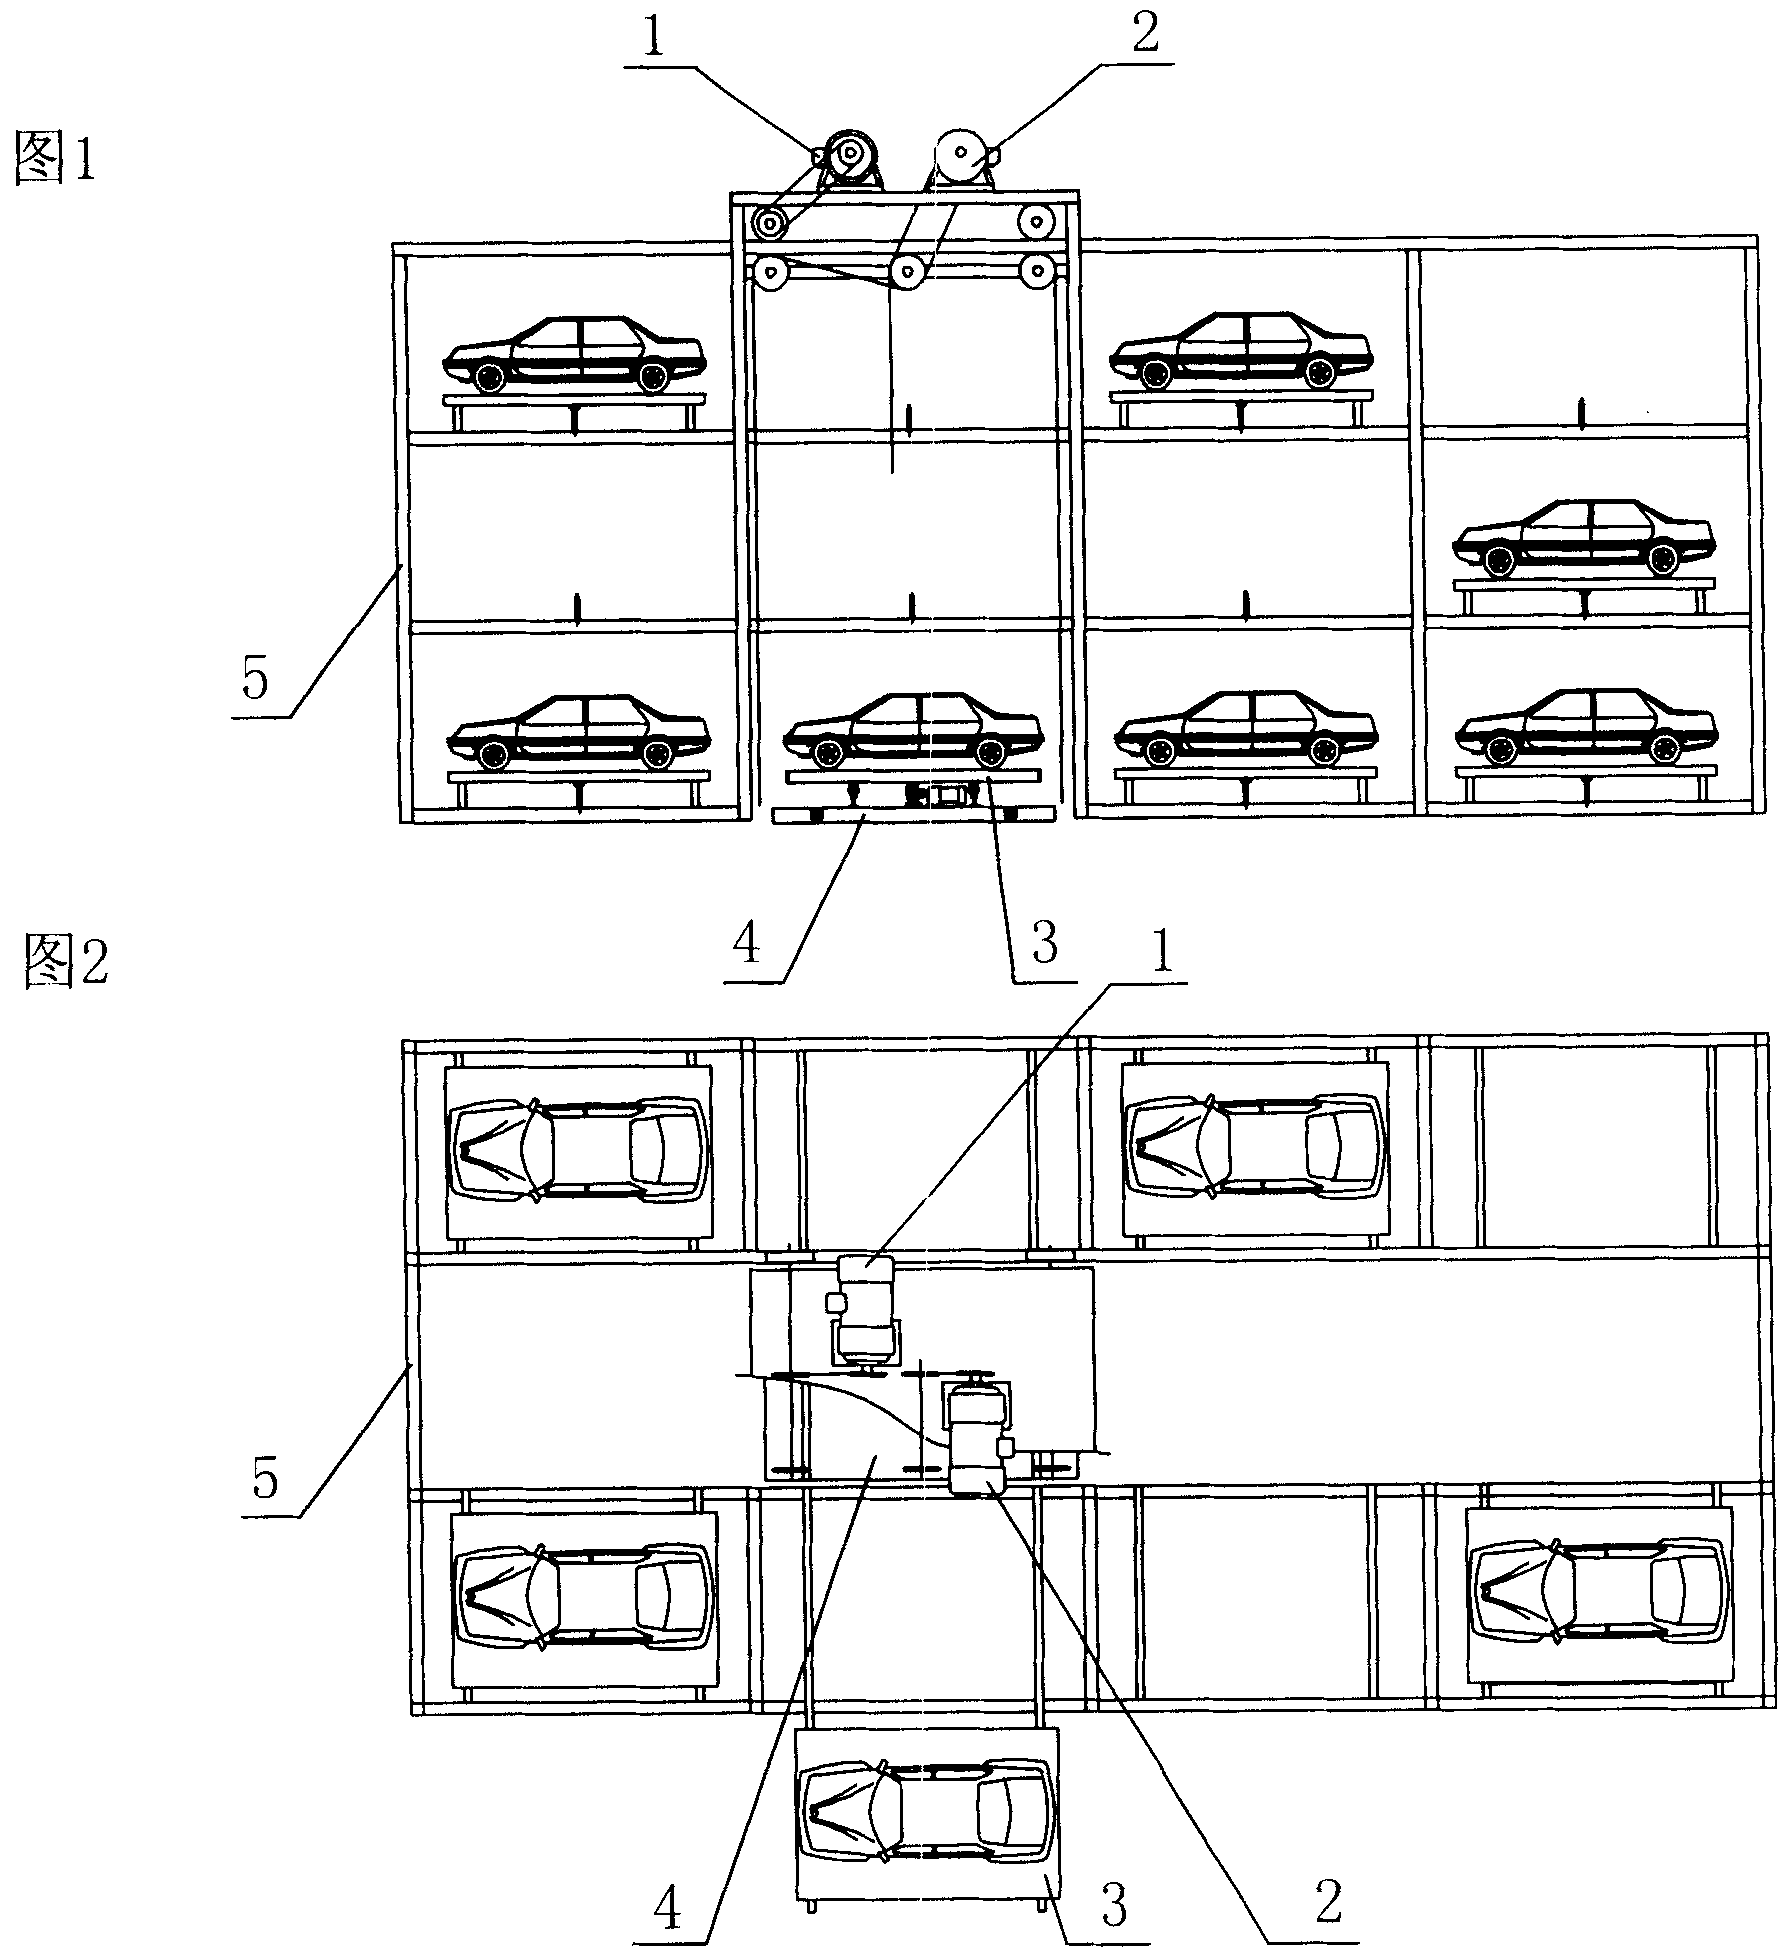 Robot for carrying vehicle